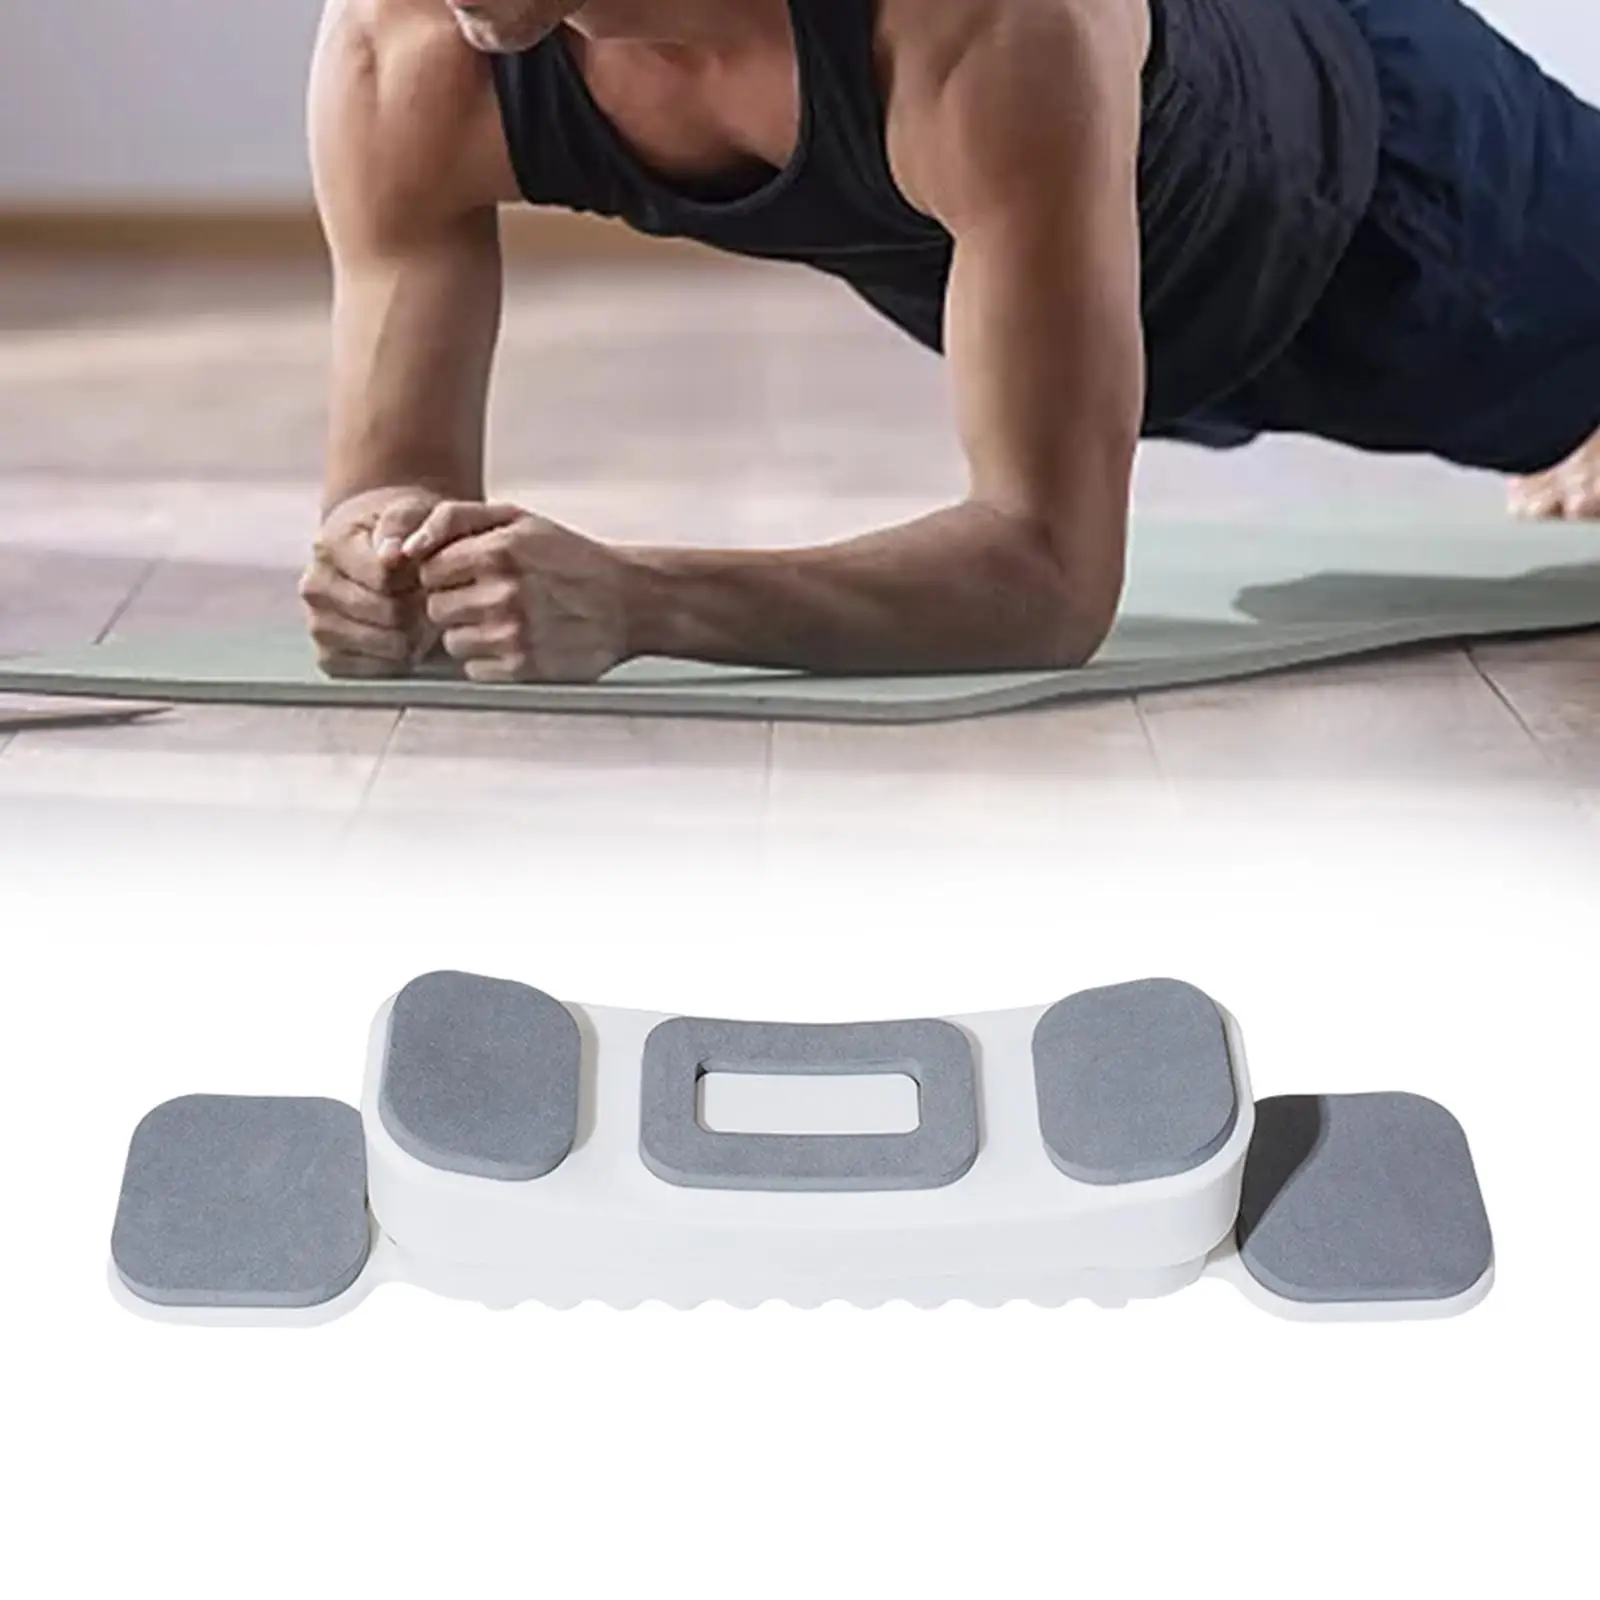 Core Trainer Abdominal Equipment with Non Slip Bottom Training for Shoulders Muscle Women Auxiliary Fitness Bodybuilding Travel